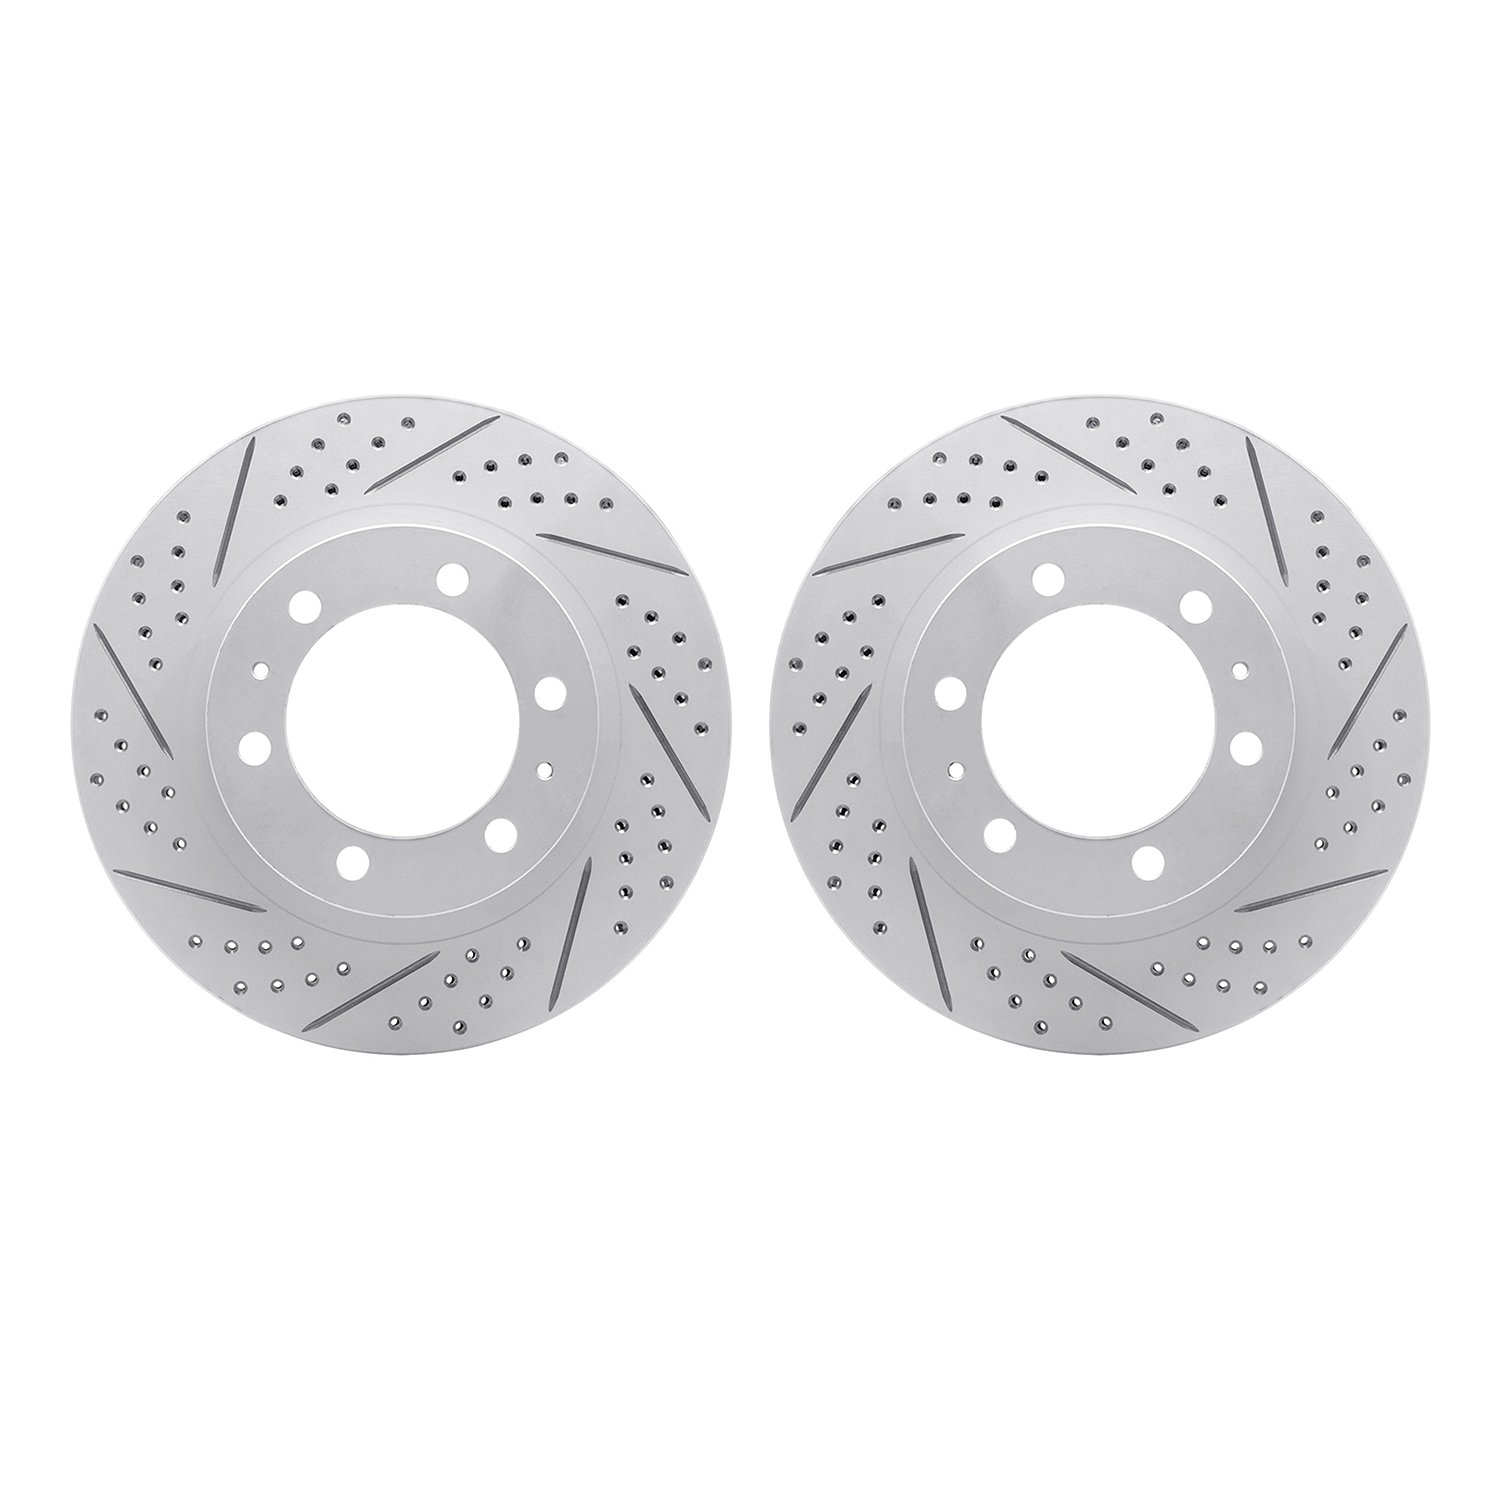 2002-76021 Geoperformance Drilled/Slotted Brake Rotors, Fits Select Lexus/Toyota/Scion, Position: Front